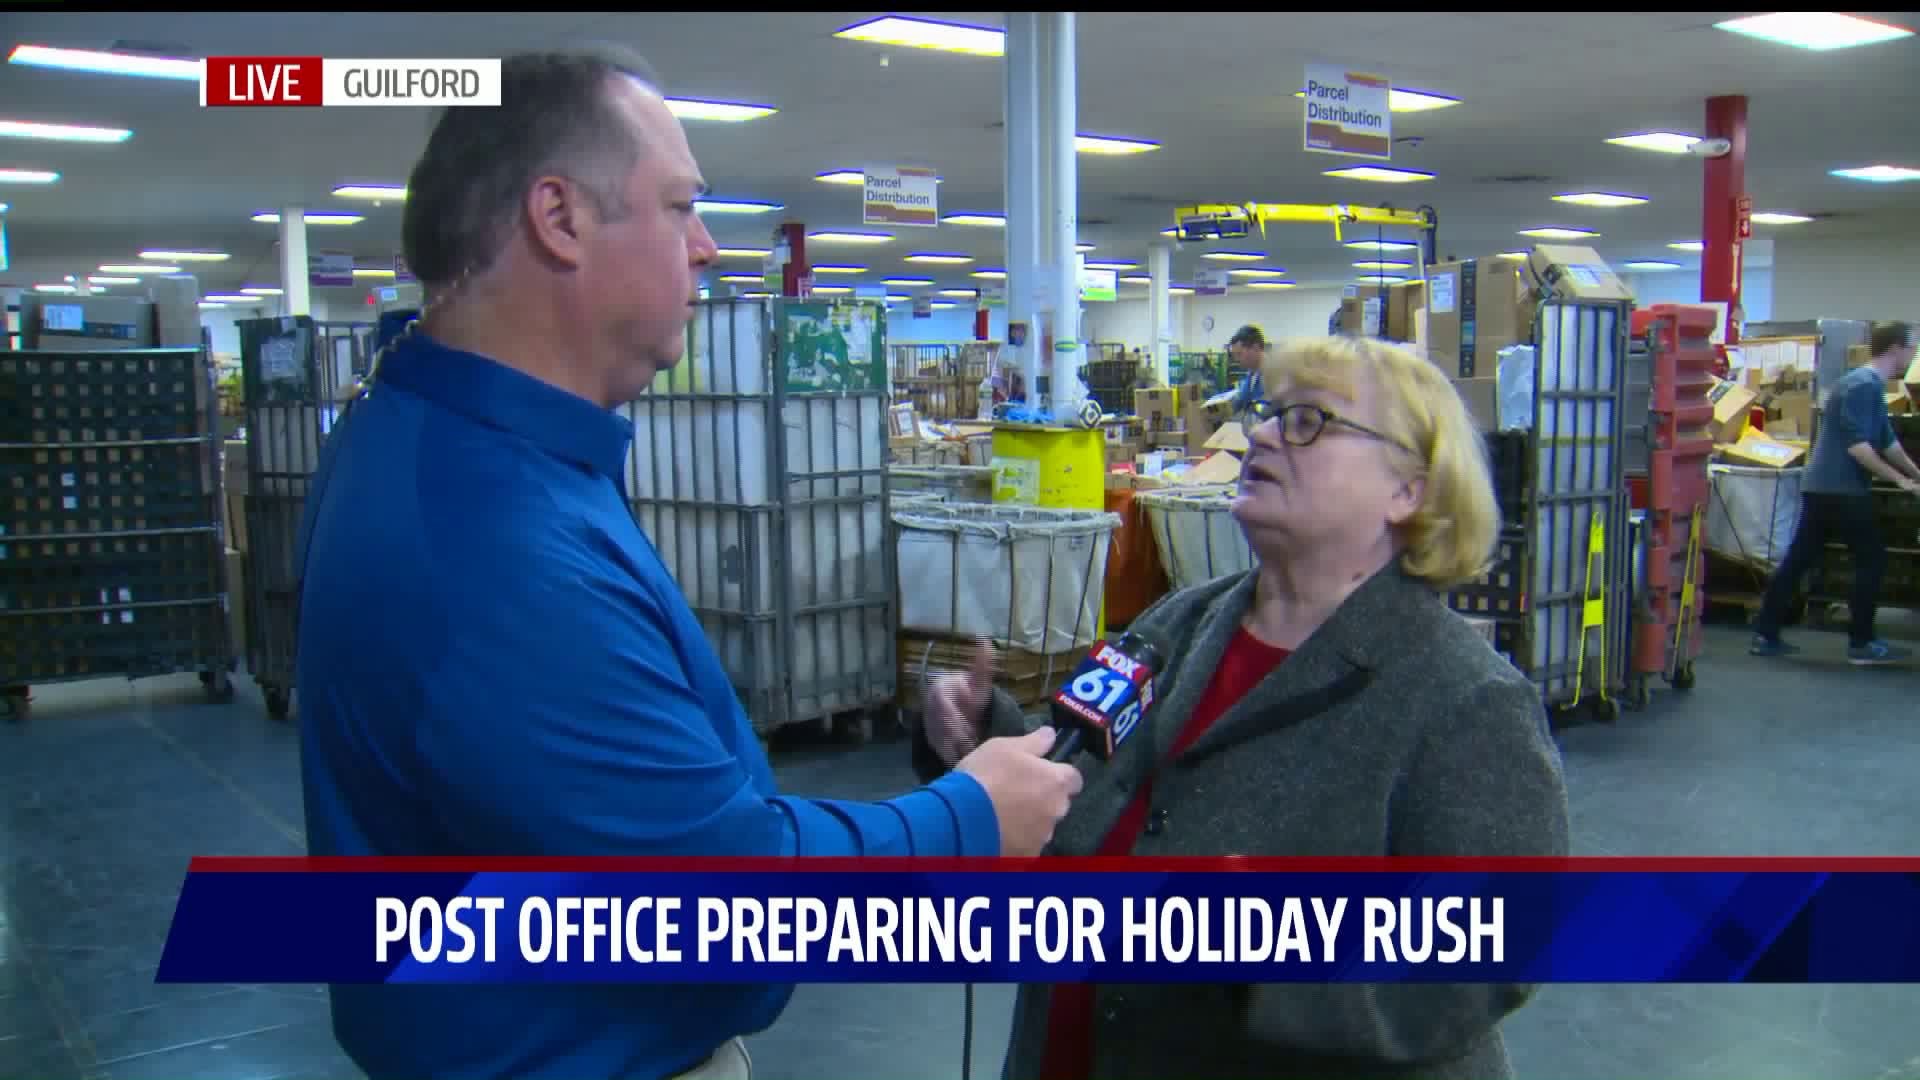 Post office preparing for holiday rush